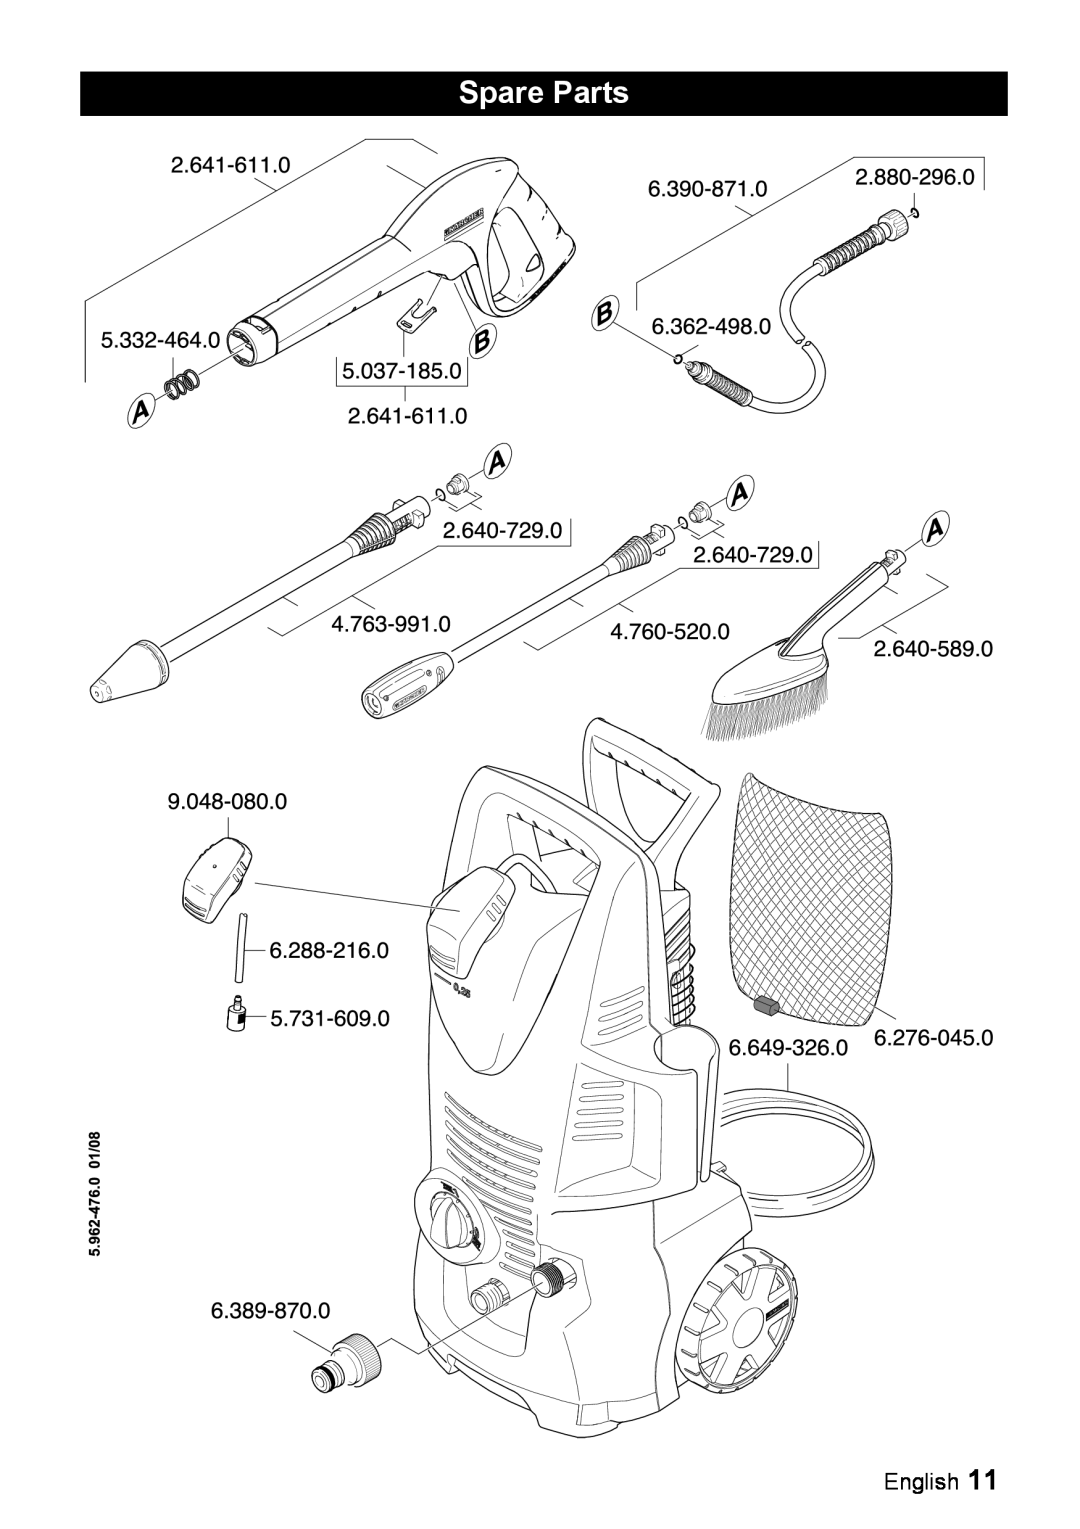 Karcher K 2.91 M operating instructions Spare Parts, English 